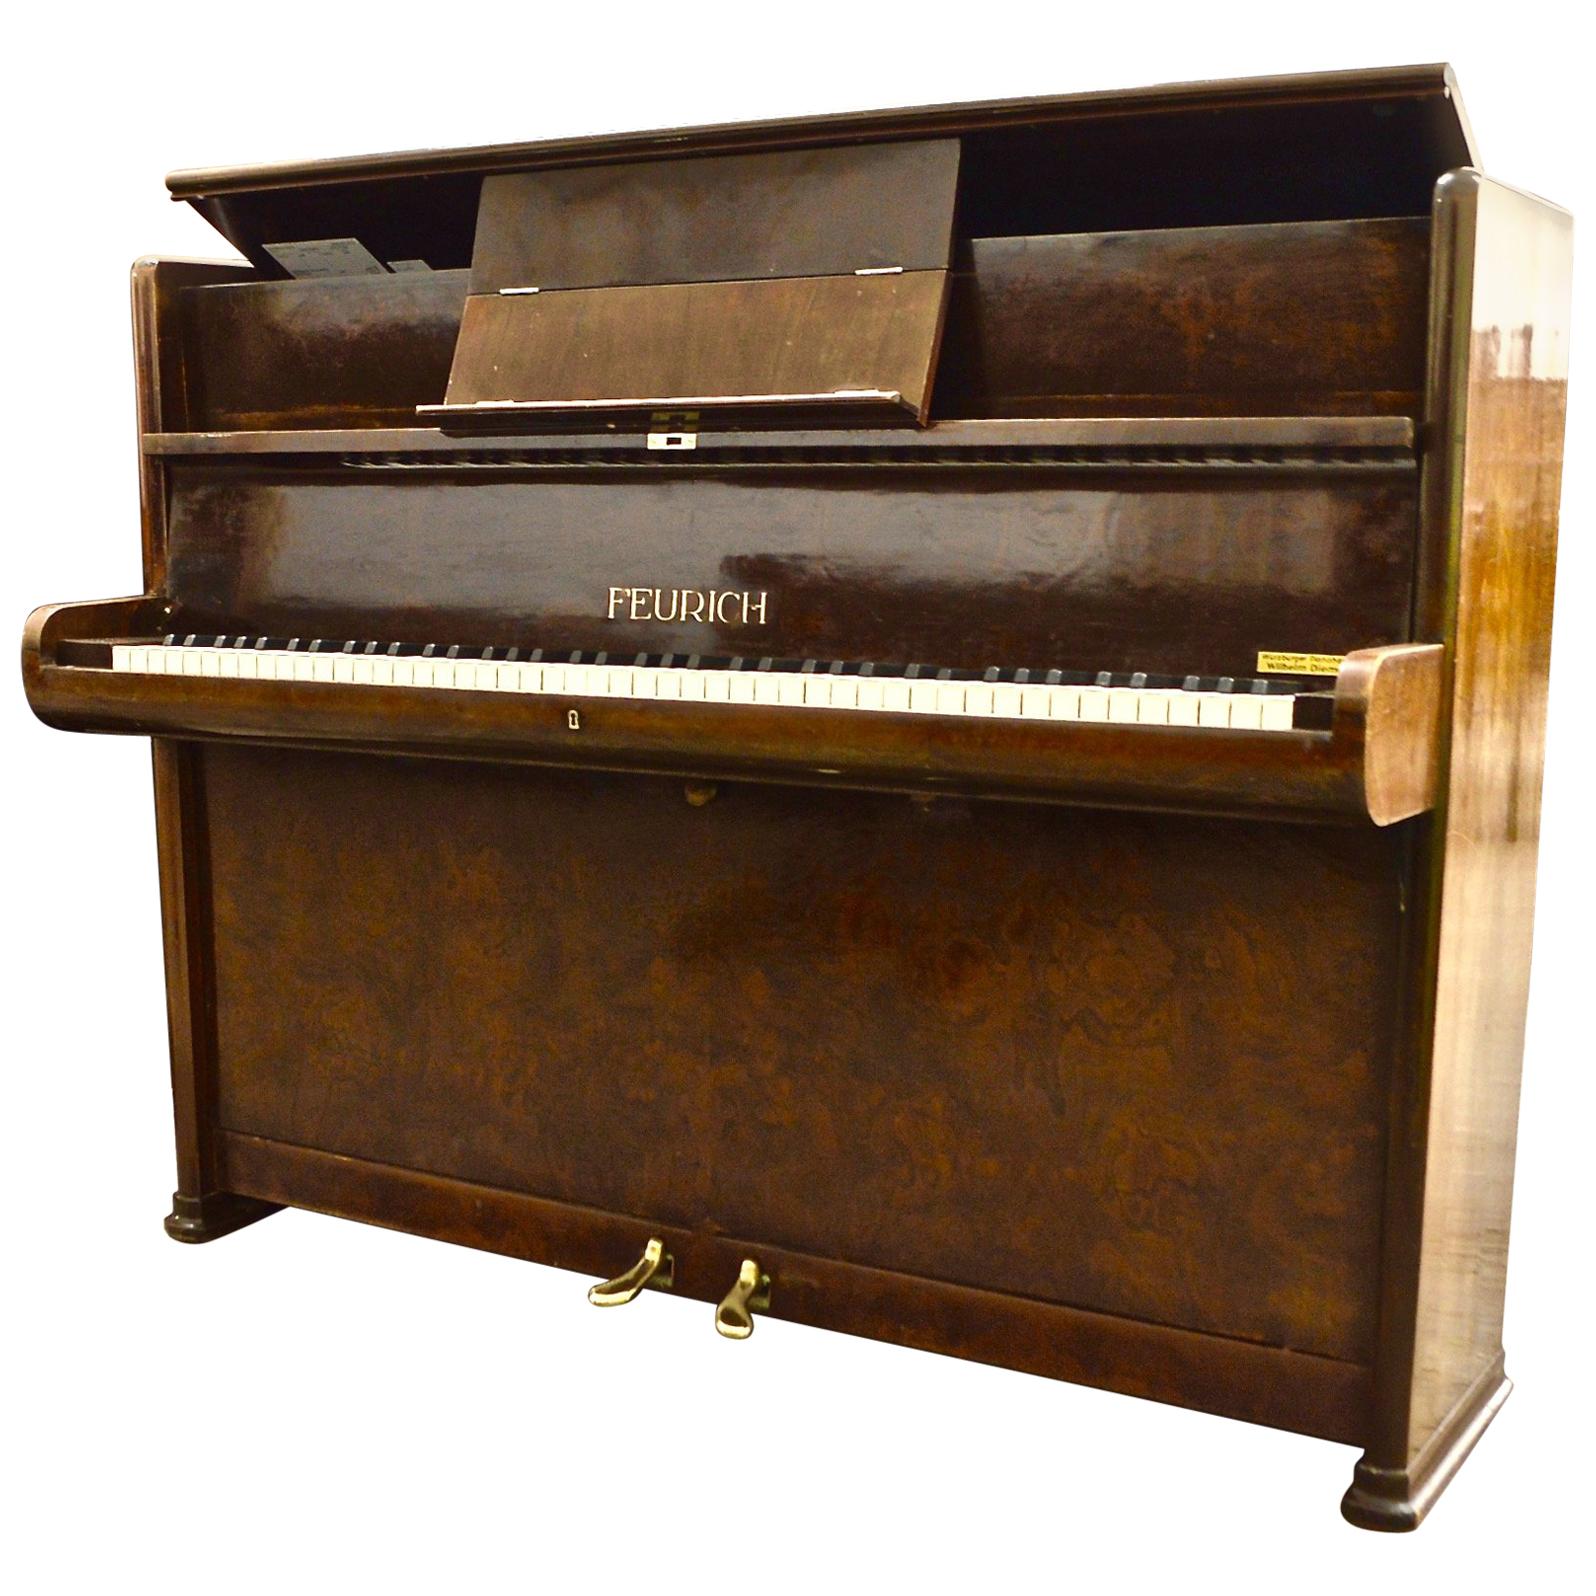 German Made Feurich Piano, Bahaus Designed, Made in 1938 For Sale